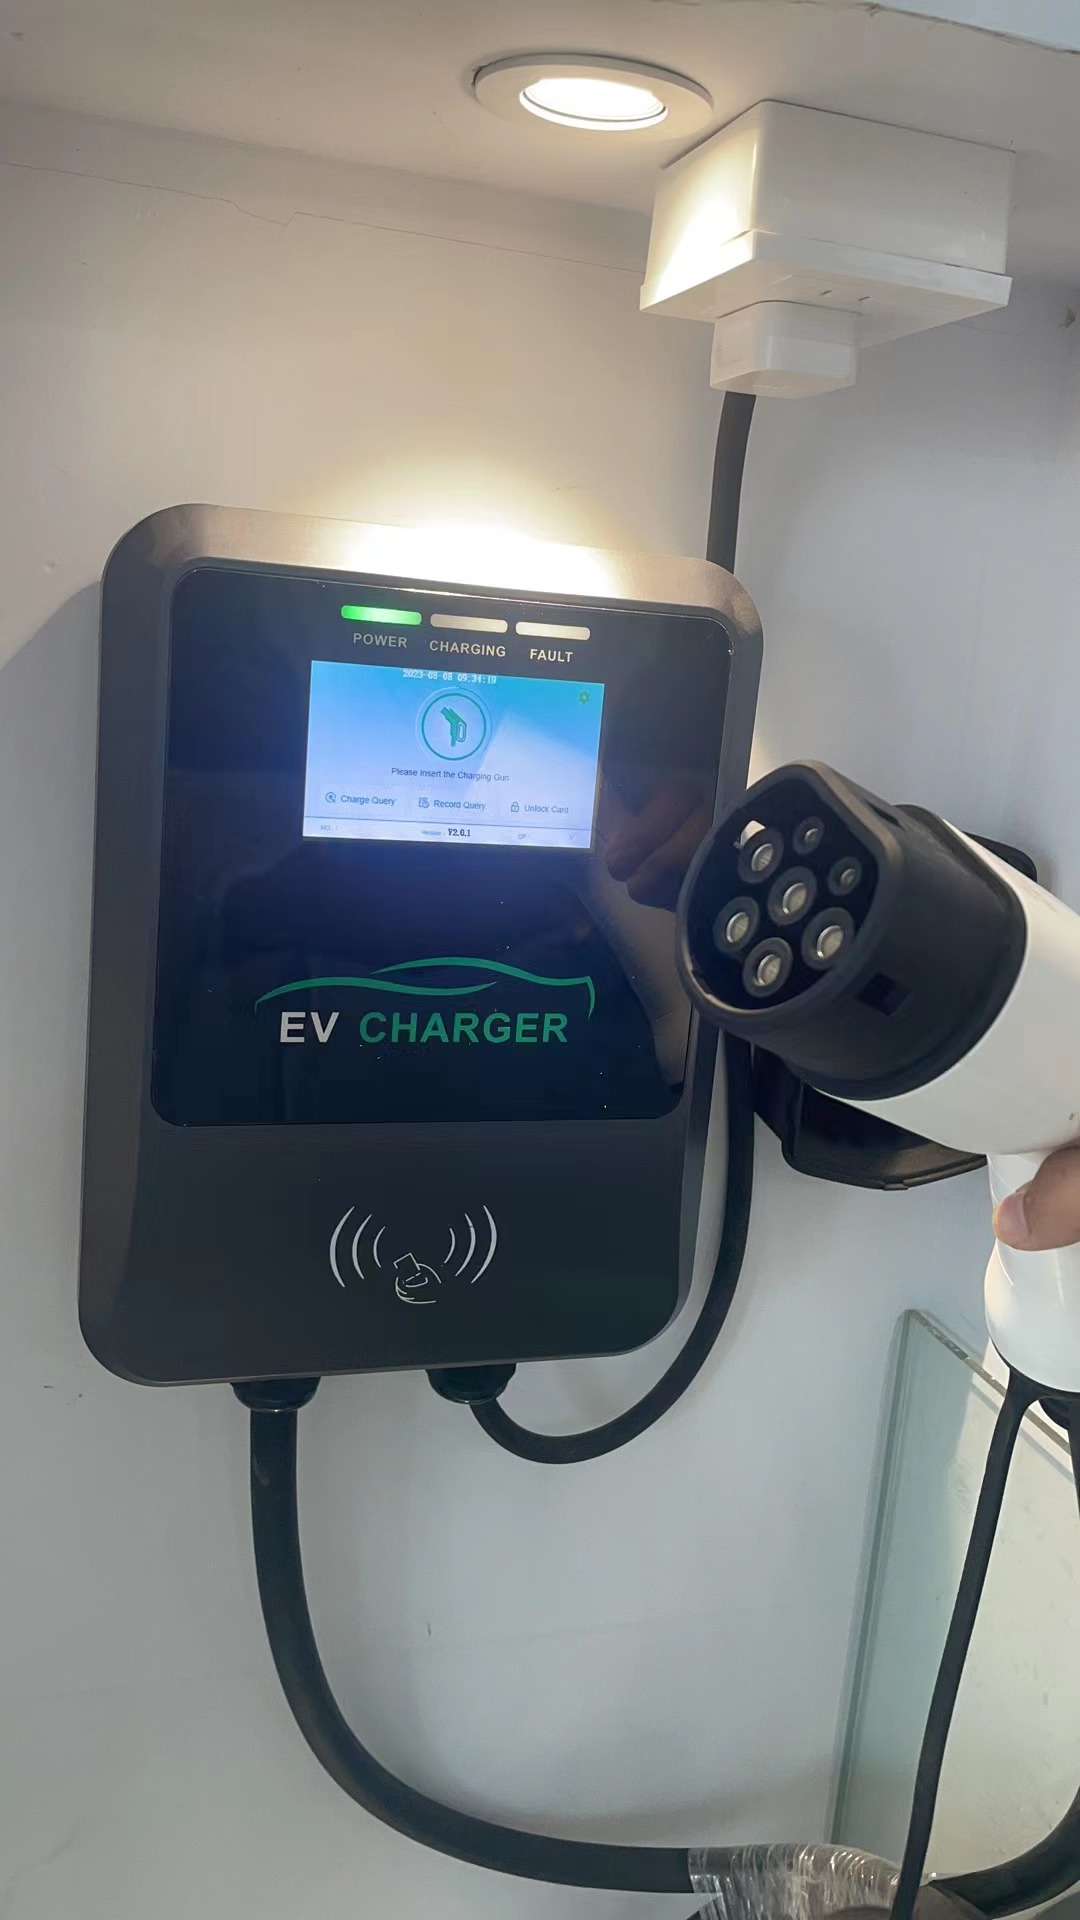 22KW ev wallbox electric vehicle charger ev charger station